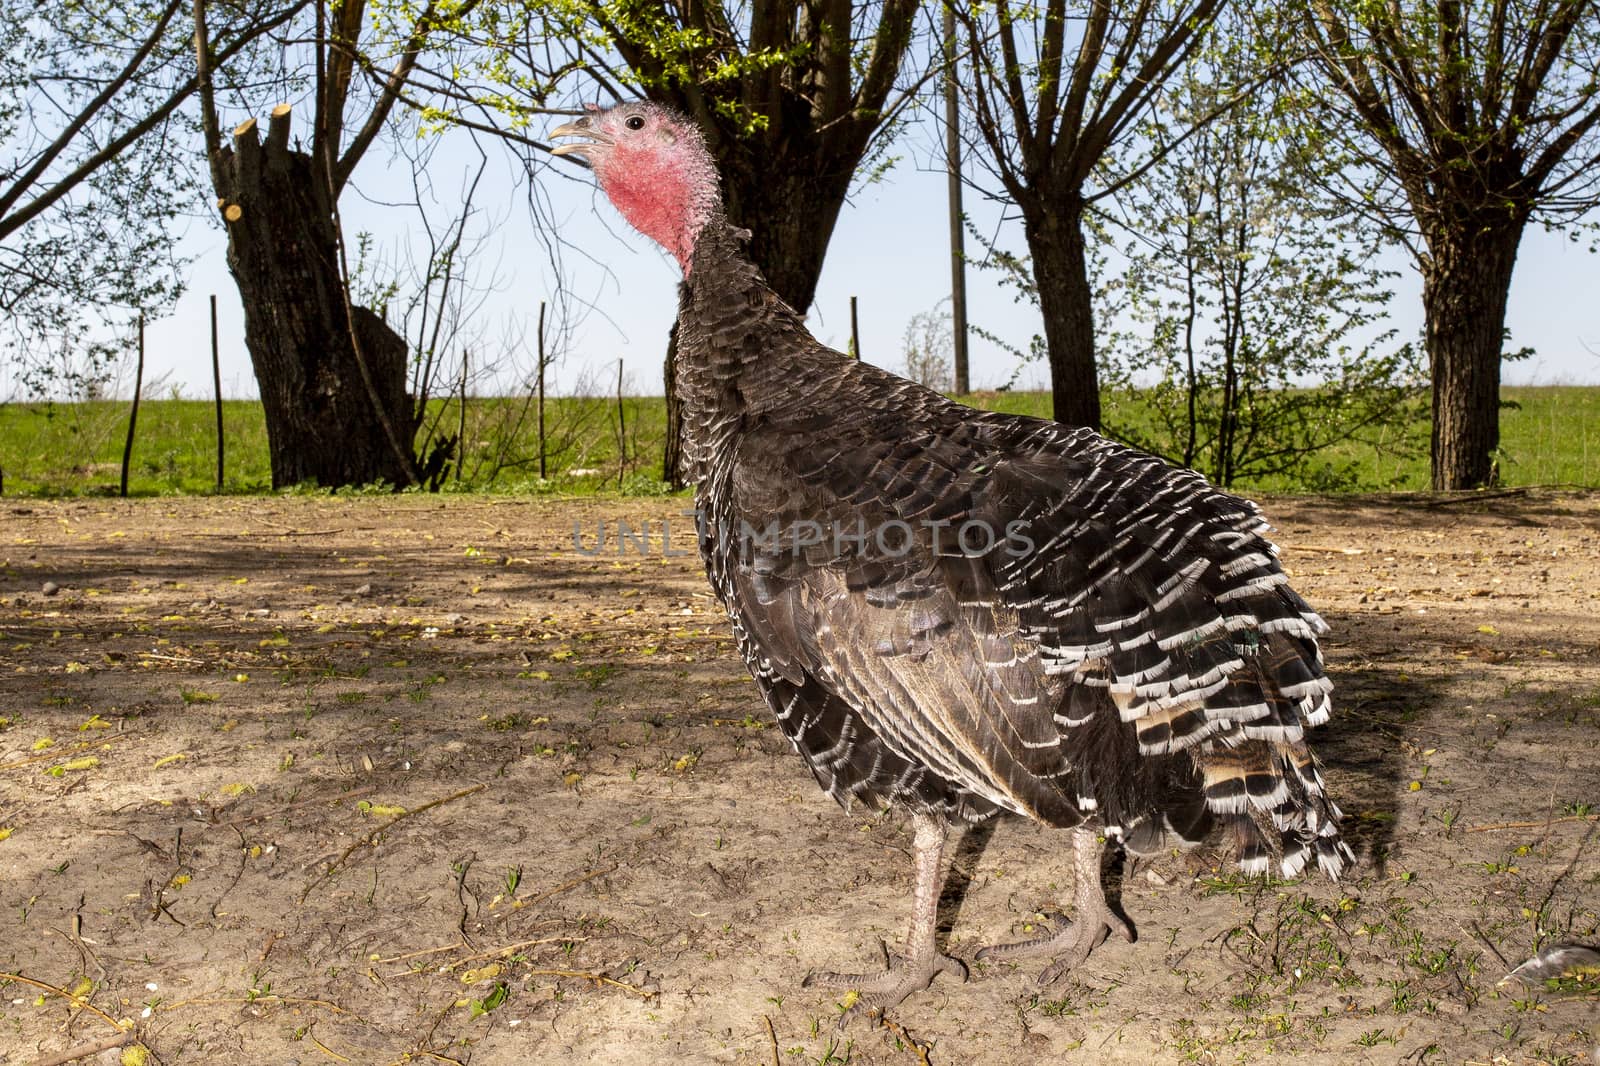 Big beautiful turkey on a background of trees and green grass. Poultry, agriculture, poultry rearing.